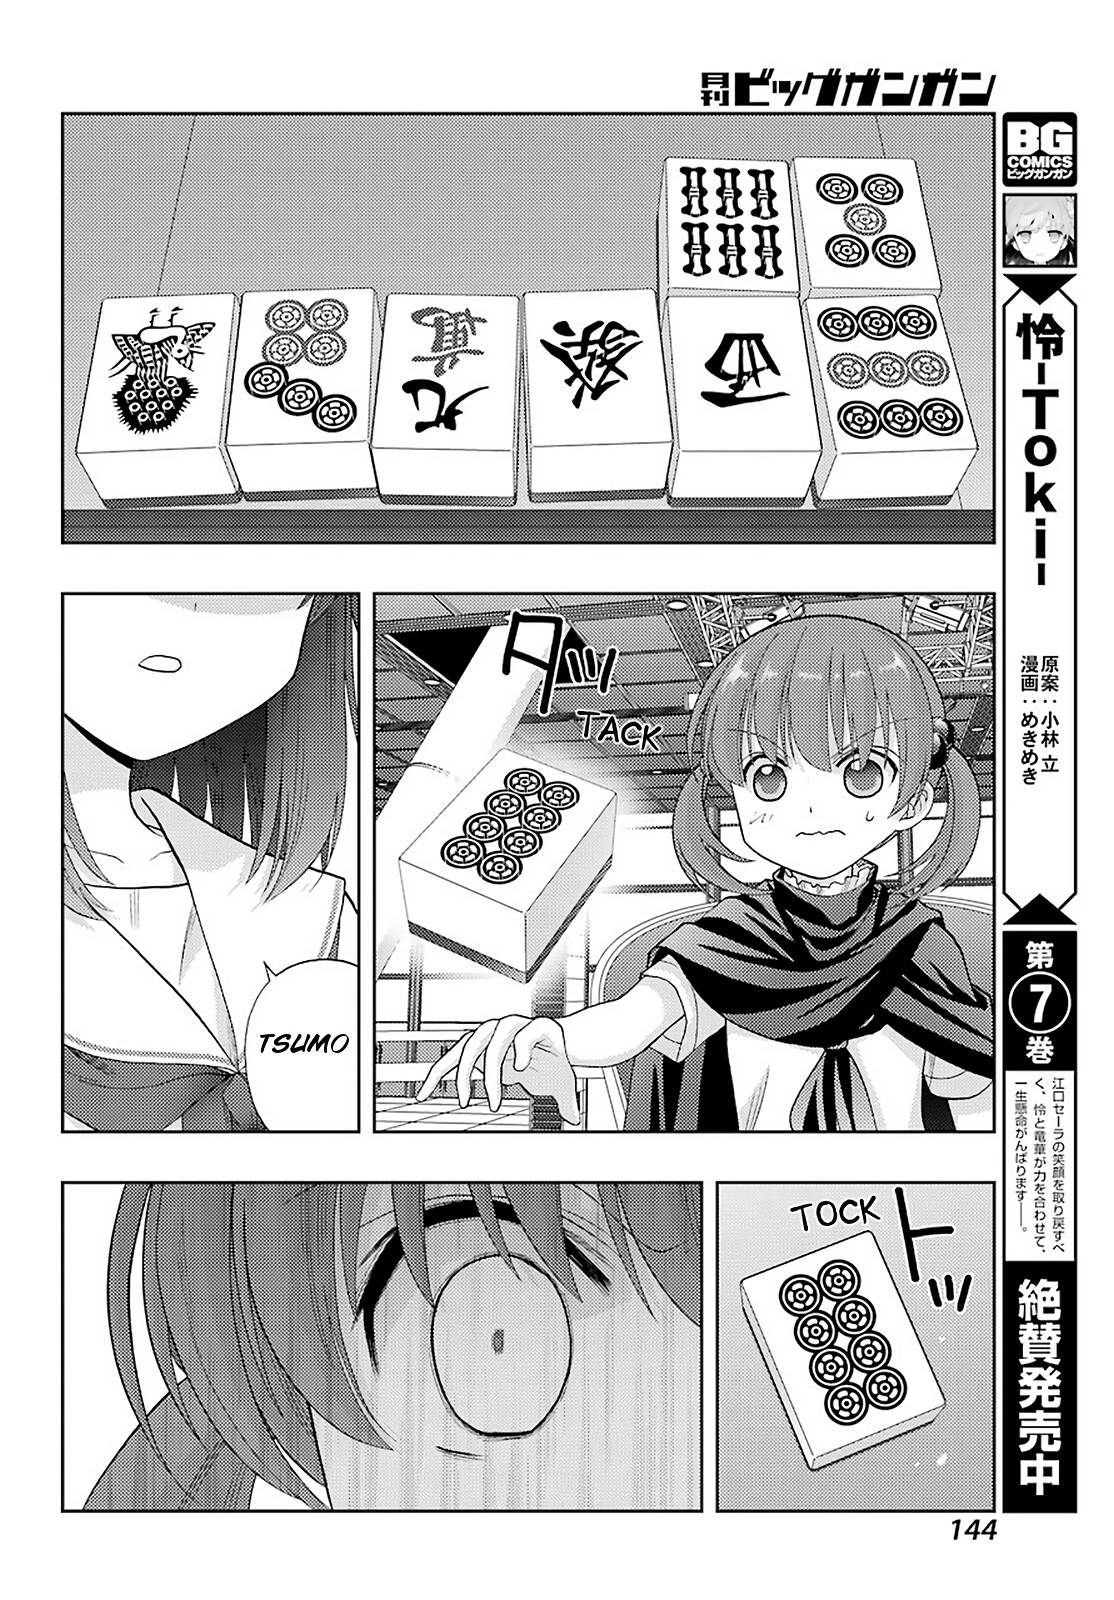 Saki: Achiga-Hen - Episode Of Side-A - New Series - chapter 30 - #5